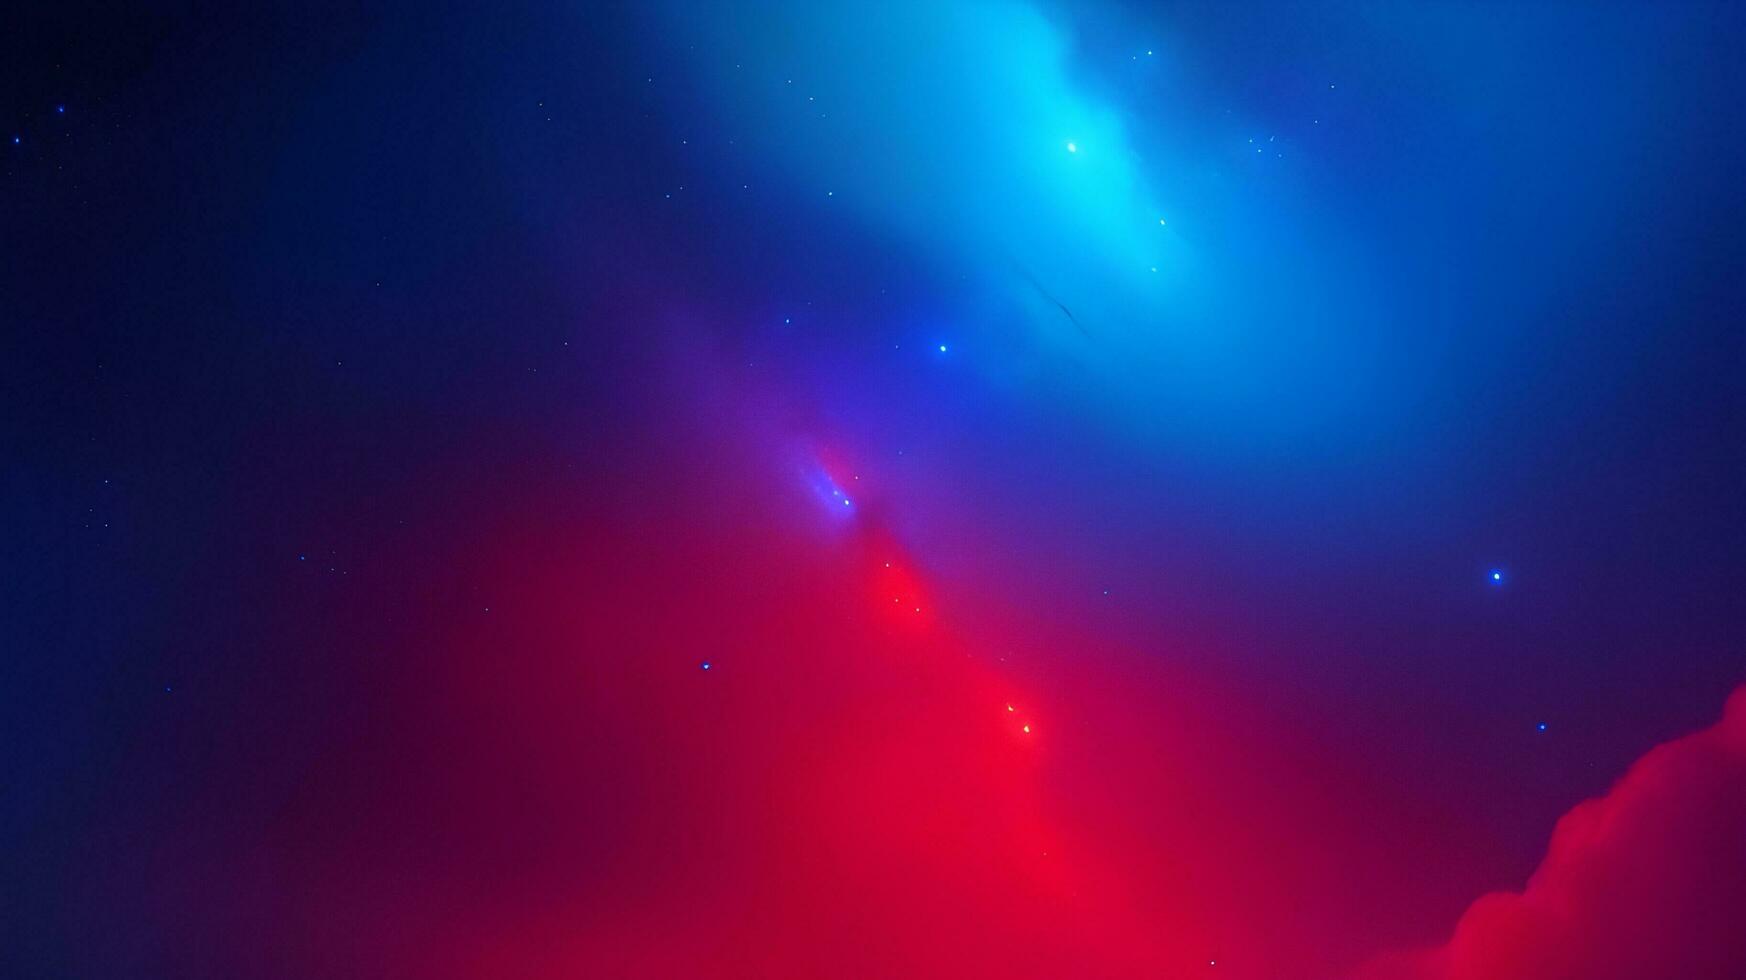 minimalist blue and red galaxy artwork background that uses subtle gradients photo